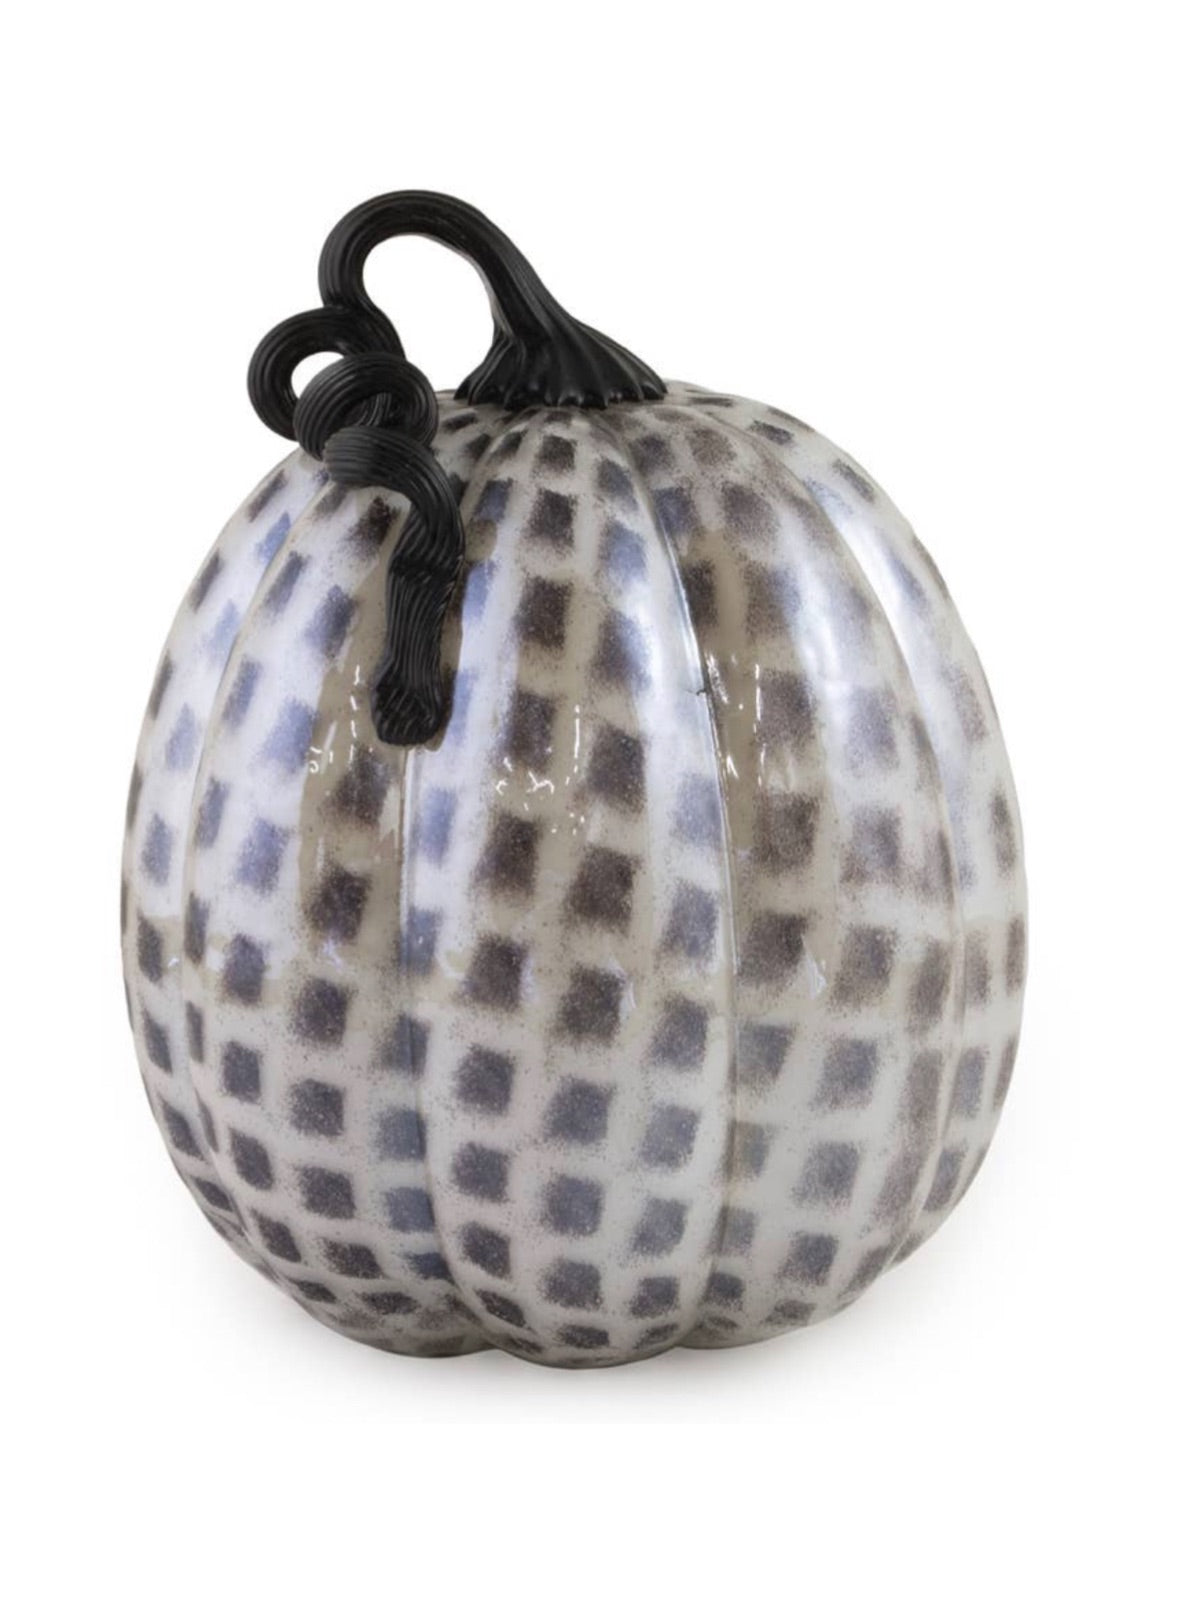 Add elegance to your fall decor with these gorgeous handcrafted glass pumpkins. This classic seasonal accent has grey color pattern with a dark grey stem! A pretty pumpkin palette for your fall dining and decor.